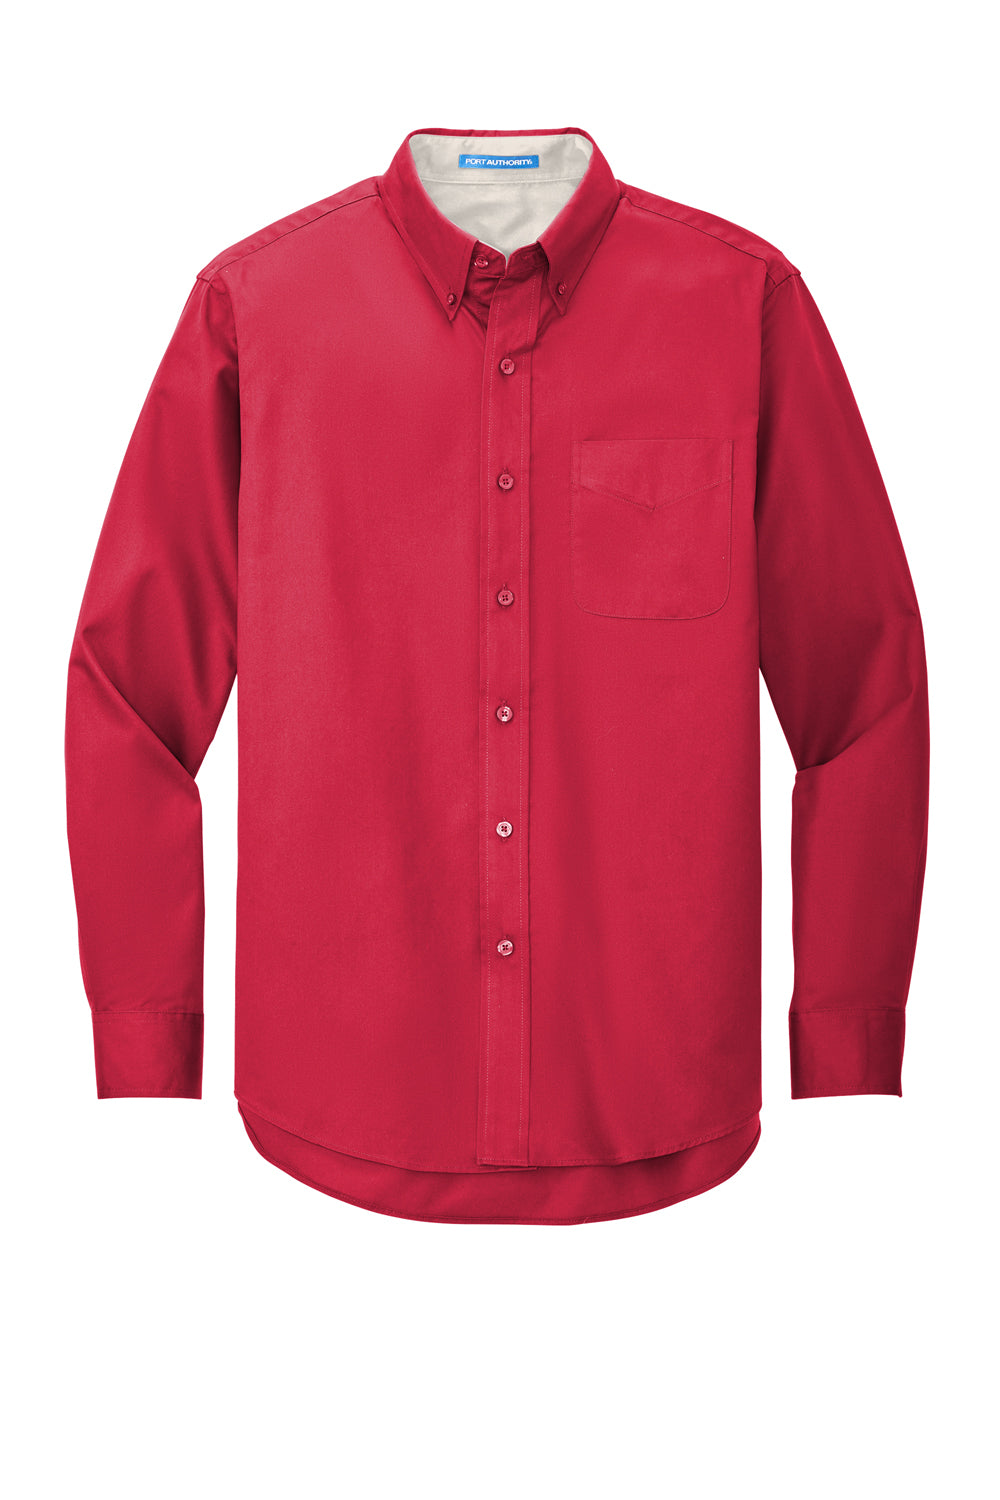 Port Authority S608/TLS608/S608ES Mens Easy Care Wrinkle Resistant Long Sleeve Button Down Shirt w/ Pocket Red Flat Front